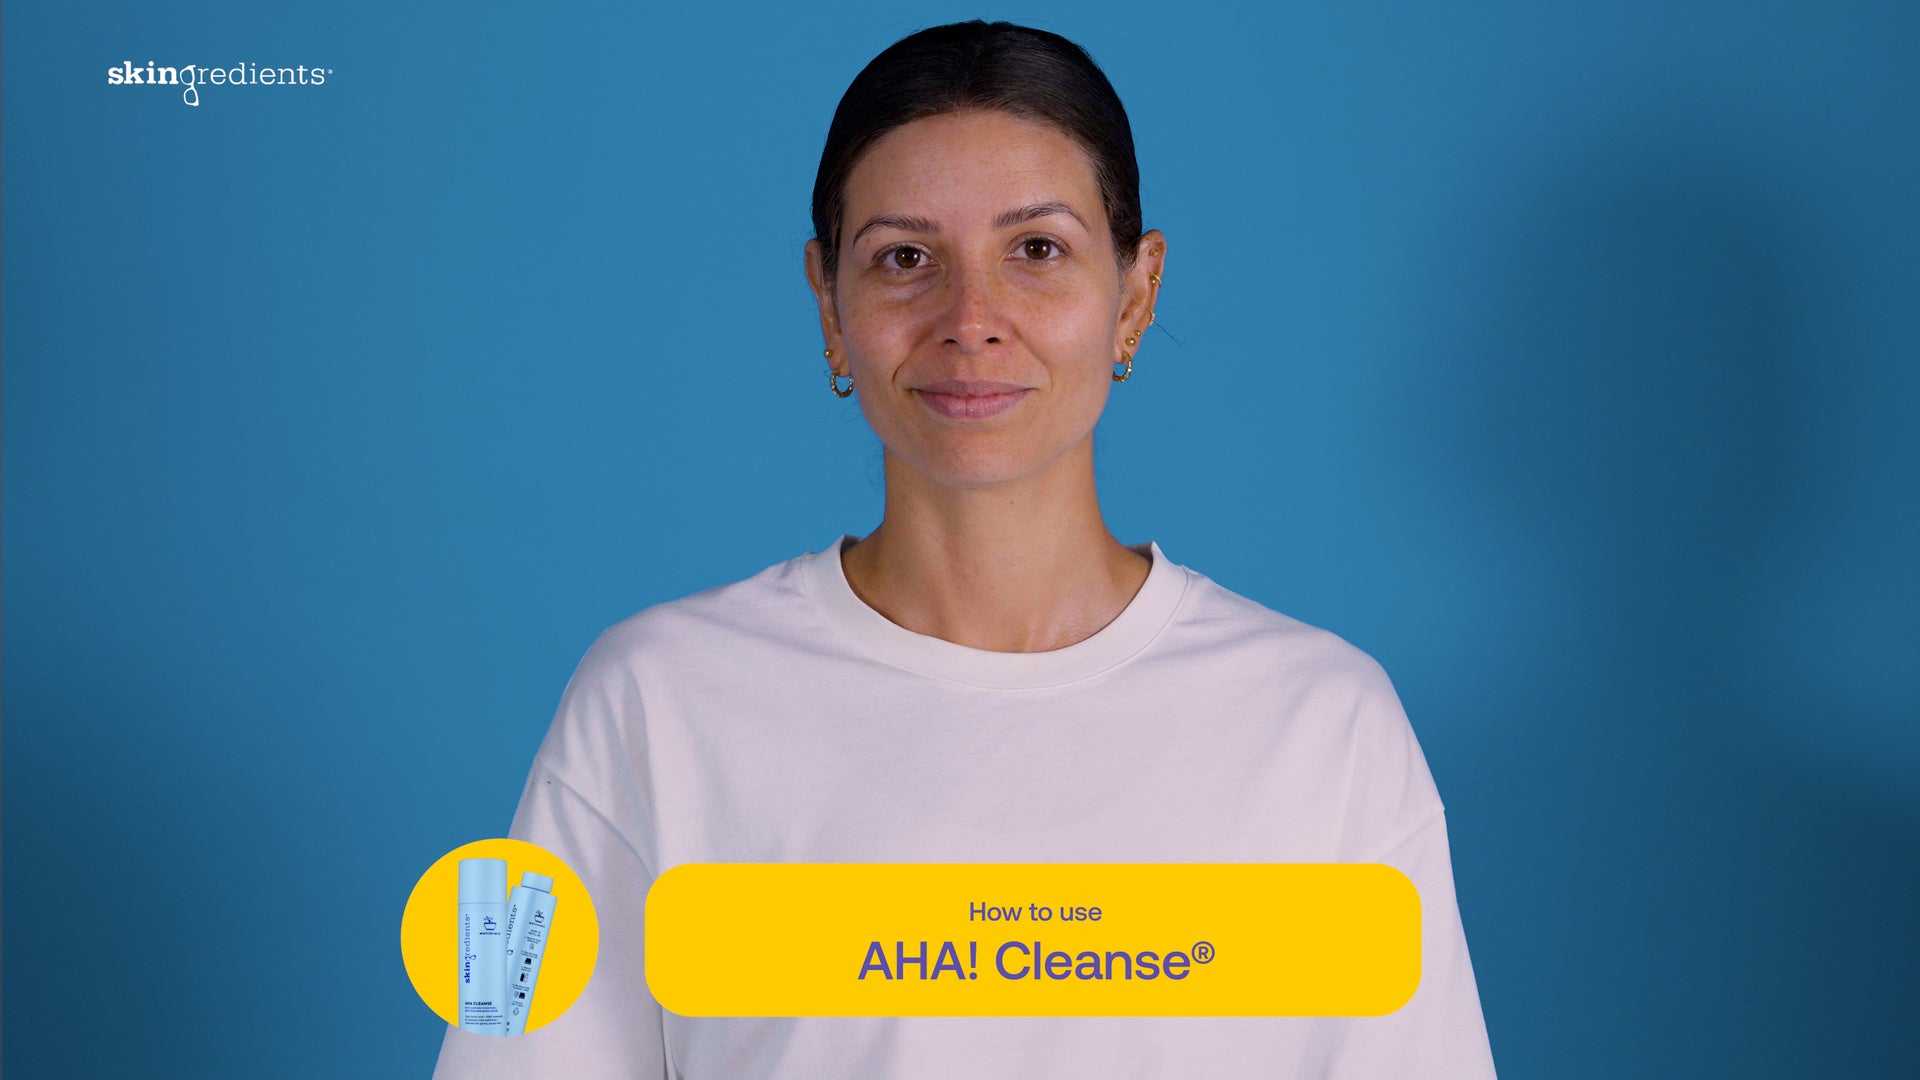 Load video: &lt;p&gt;An AHA Cleanse lover? Shop + save with this loyalty bundle.&lt;/p&gt;
&lt;p&gt;&lt;strong&gt;This bundle includes:&lt;/strong&gt;&lt;/p&gt;
&lt;p&gt;&lt;span data-mce-fragment=&quot;1&quot;&gt;&lt;strong&gt;x2 AHA Brightening + Exfoliating Lactic Acid Cleanser refills.&lt;/strong&gt; &lt;/span&gt;Skingredients® AHA! Cleanse® (100ml) is an active cleanser and micro-mask that contains 8% lactic acid and 1% PHA, which work in harmony to brighten, exfoliate, hydrate and plump the skin. Part of the Skingredients Match + Mix range, use AHA Cleanse 2 to 3 times a week, alternating with PreProbiotic Cleanse, for luminous, glowing skin. Lactic acid is an alpha-hydroxy acid that exfoliates the skin by gently loosening and sweeping away dead skin cells from the skin’s surface.&lt;br&gt; This cleanser promotes smooth, even skin and increases the rate of skin cell turnover. Exfoliating yet importantly also hydrating, our nerdie panellists have been loving the instant glowing results whilst not over-exfoliating the skin. Found your favourite new way to GLOW?&lt;/p&gt;
&lt;p&gt;&lt;strong&gt;NERDIE NOTE:&lt;/strong&gt; YOU MUST HAVE PURCHASED YOUR PRIMARY PACK BEFORE SWITCHING TO OUR VALUE-SAVING PLANET-FRIENDLY REFILLS!&lt;br&gt;&lt;/p&gt;